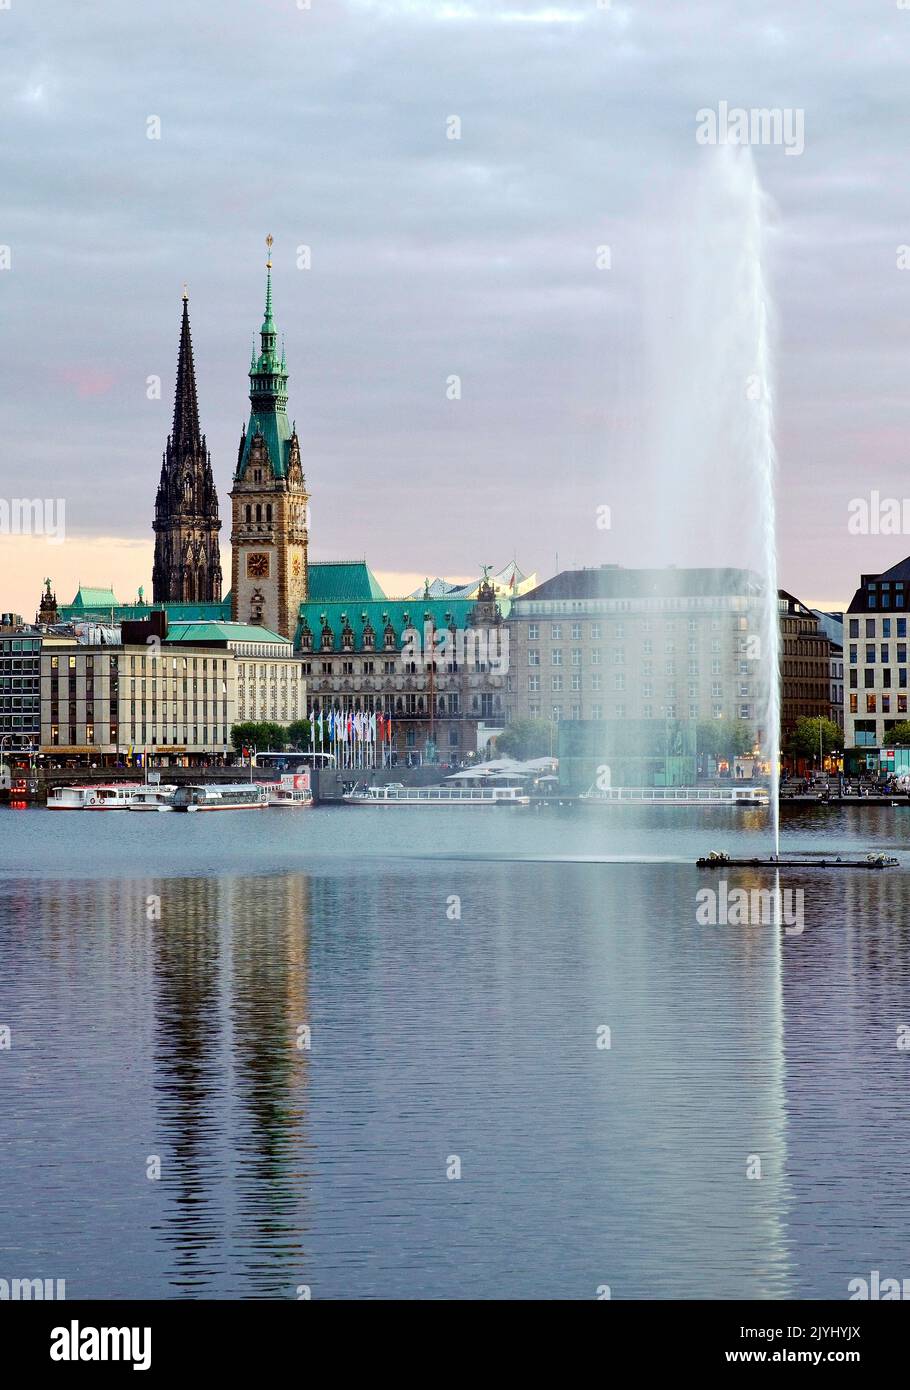 Inner Alster Lake with fountain and city scape, Germany, Hamburg Stock Photo